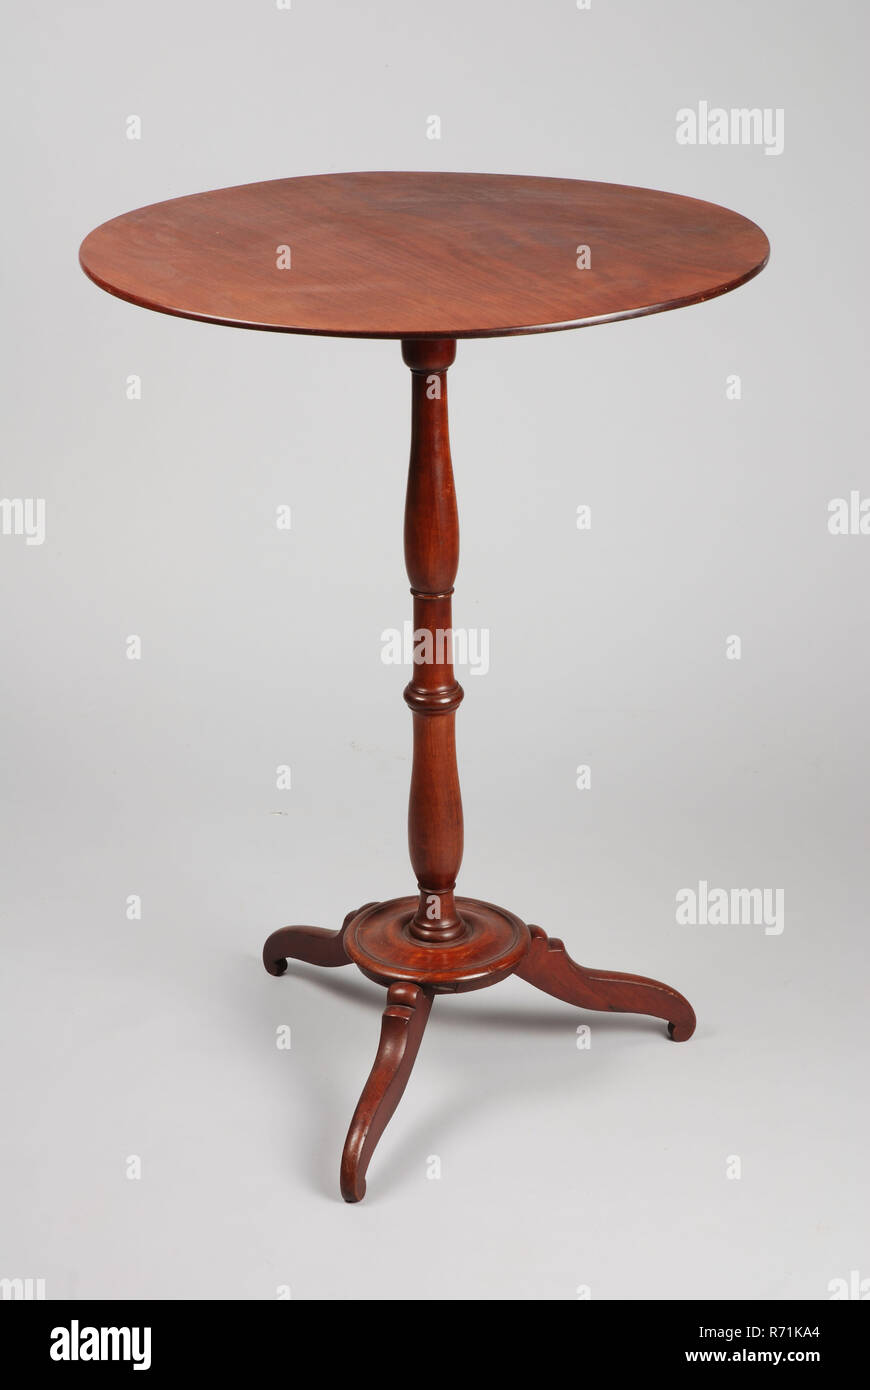 Mahogany Biedermeier table, table furniture interior design wood mahogany, sheet d 0.7 Ranke twisted leg with three-sided very thin leaf under truss paper label with no. Biedermeier Stock Photo